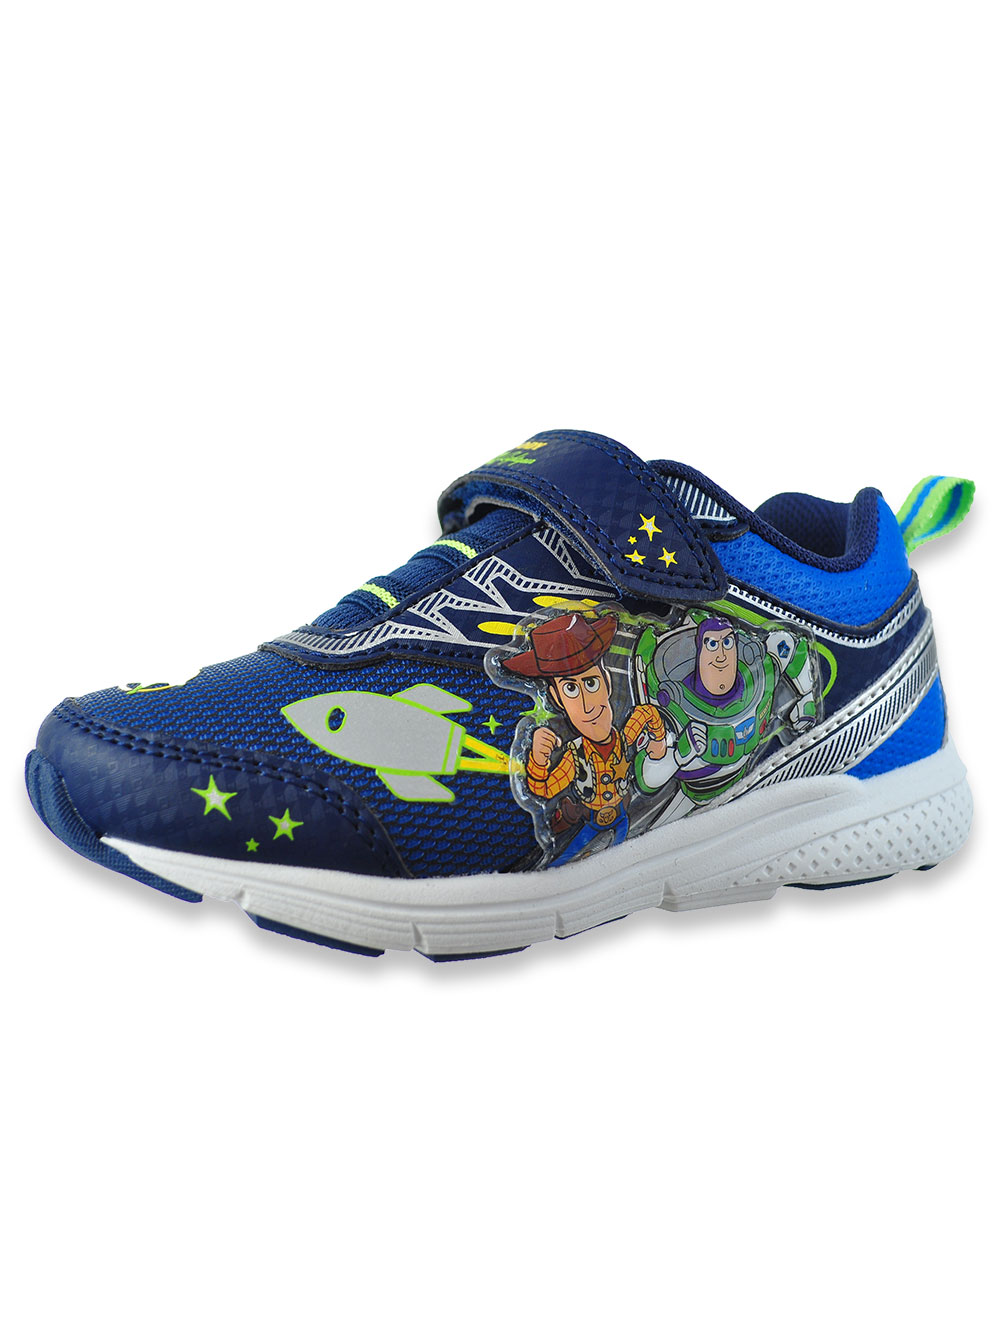 Boys' Light-Up Sneakers